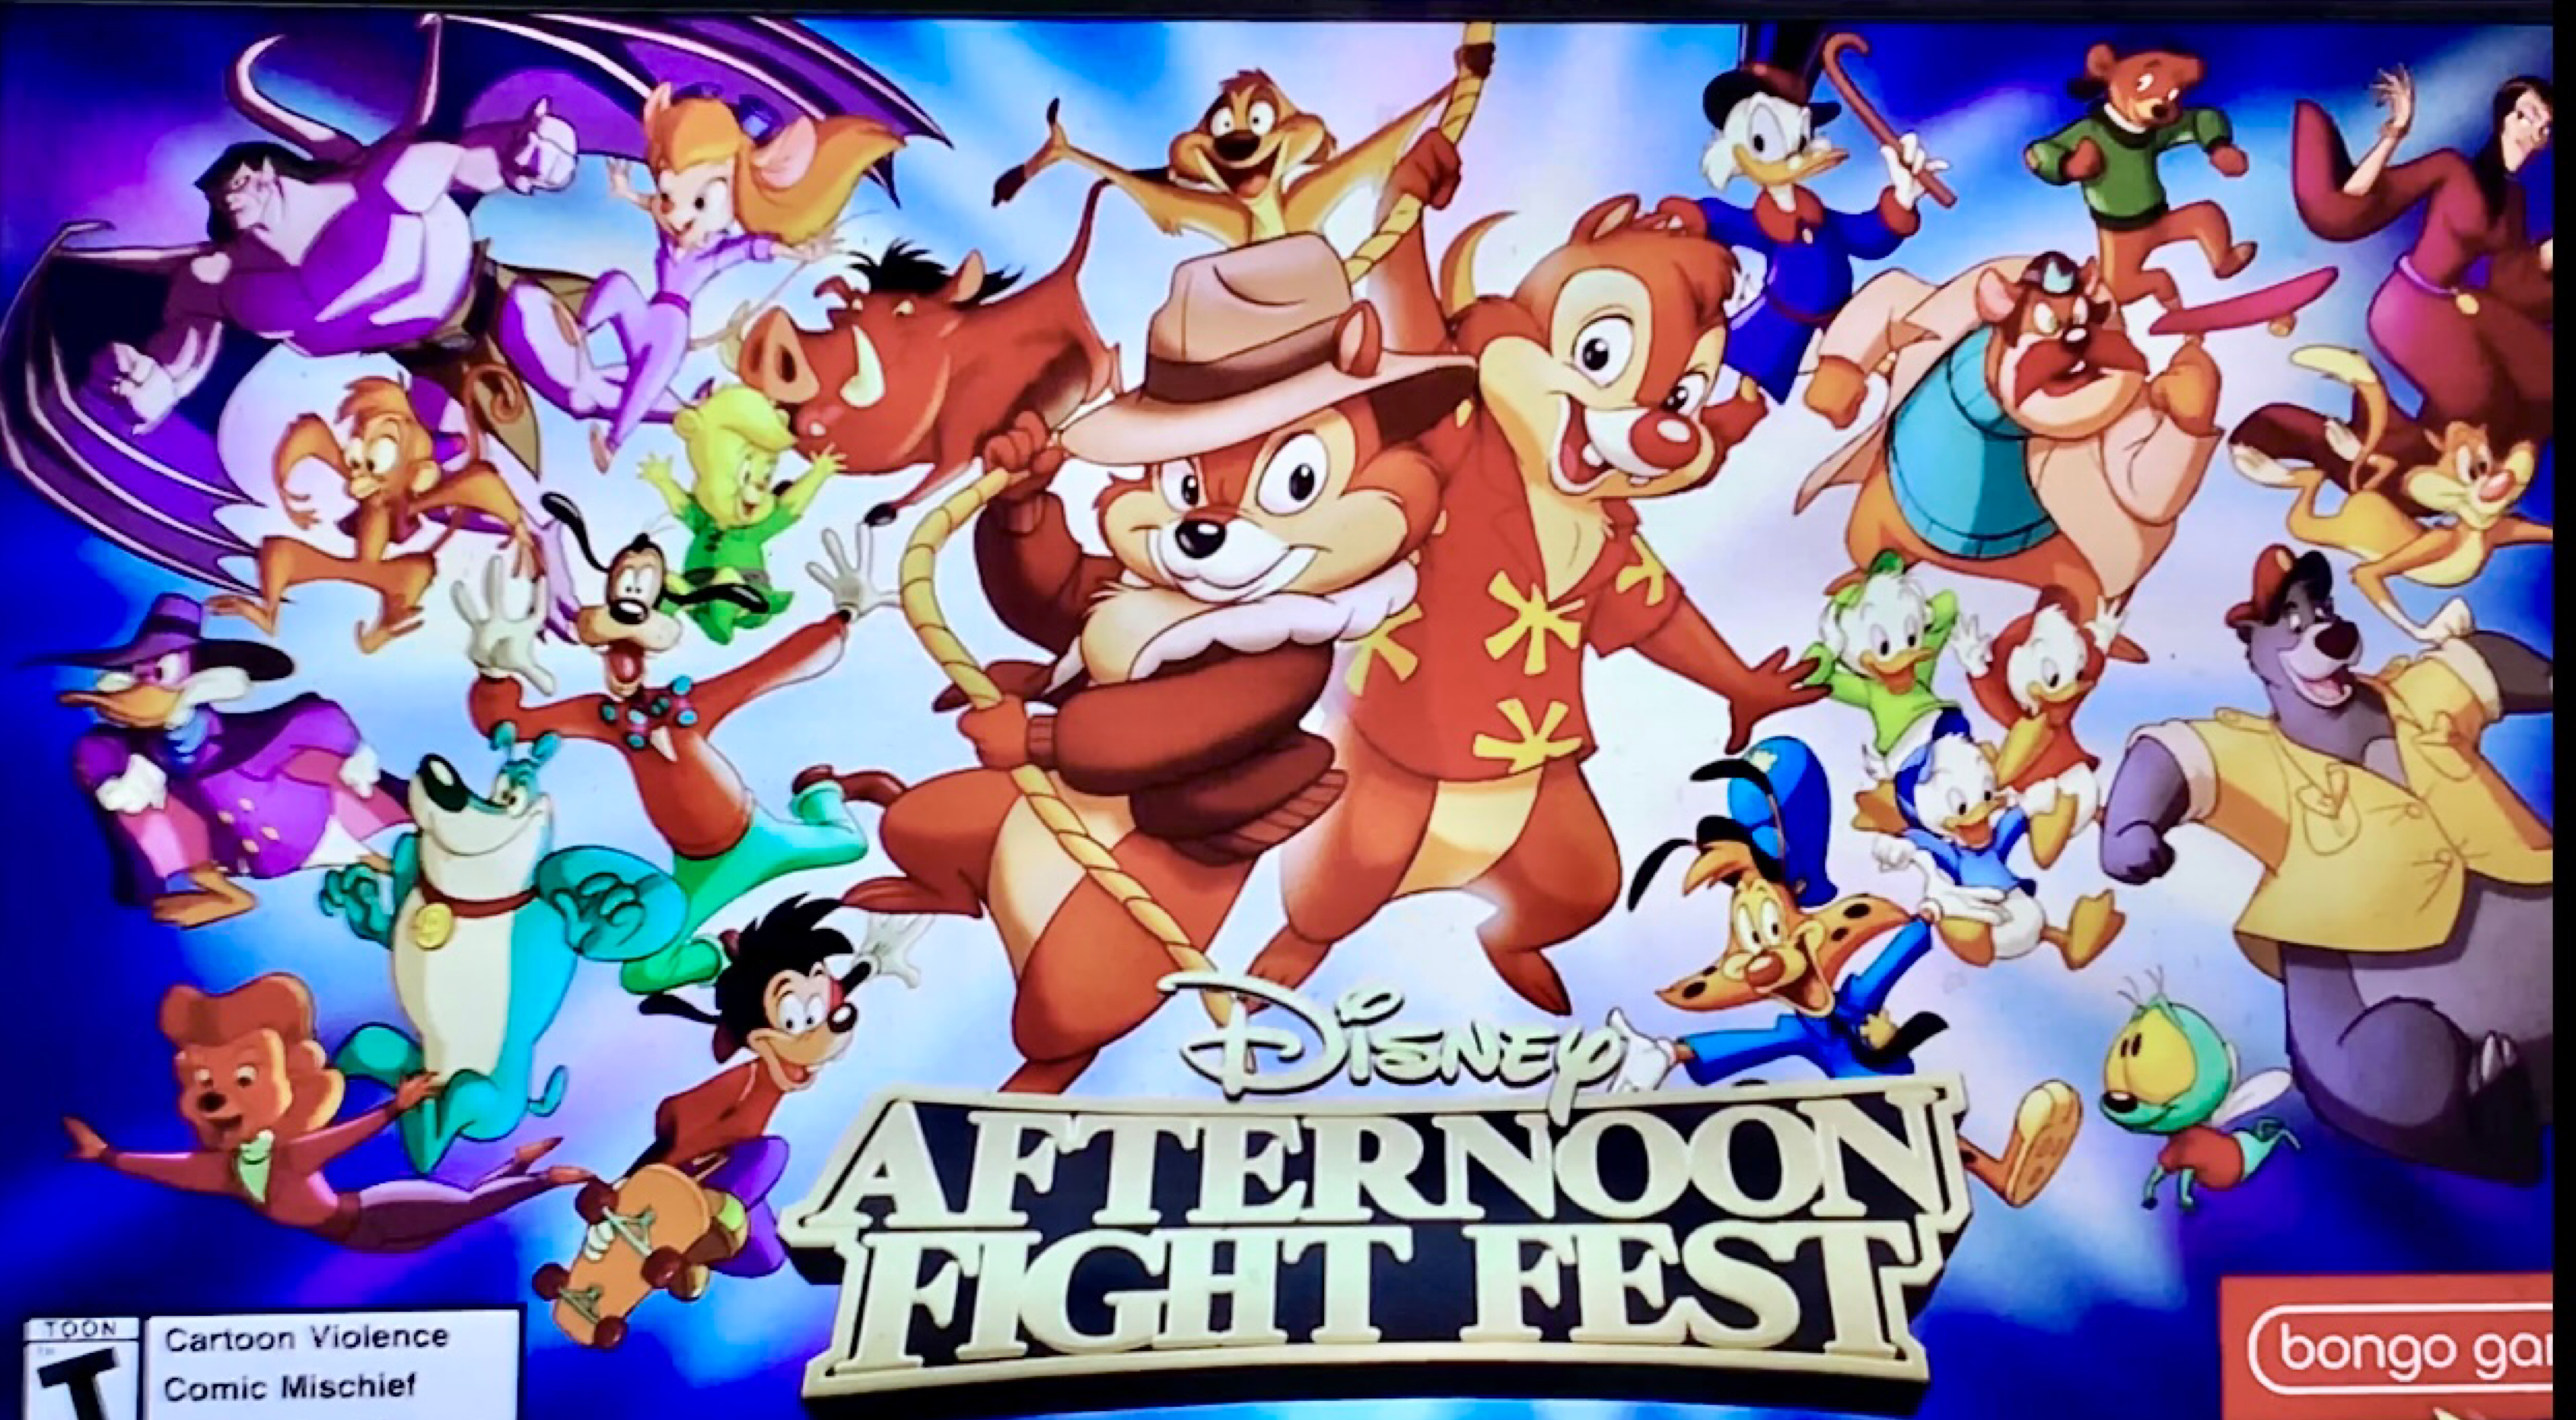 parti scaring kode Disney AFTERNOON Fight Fest by Yingcartoonman on DeviantArt